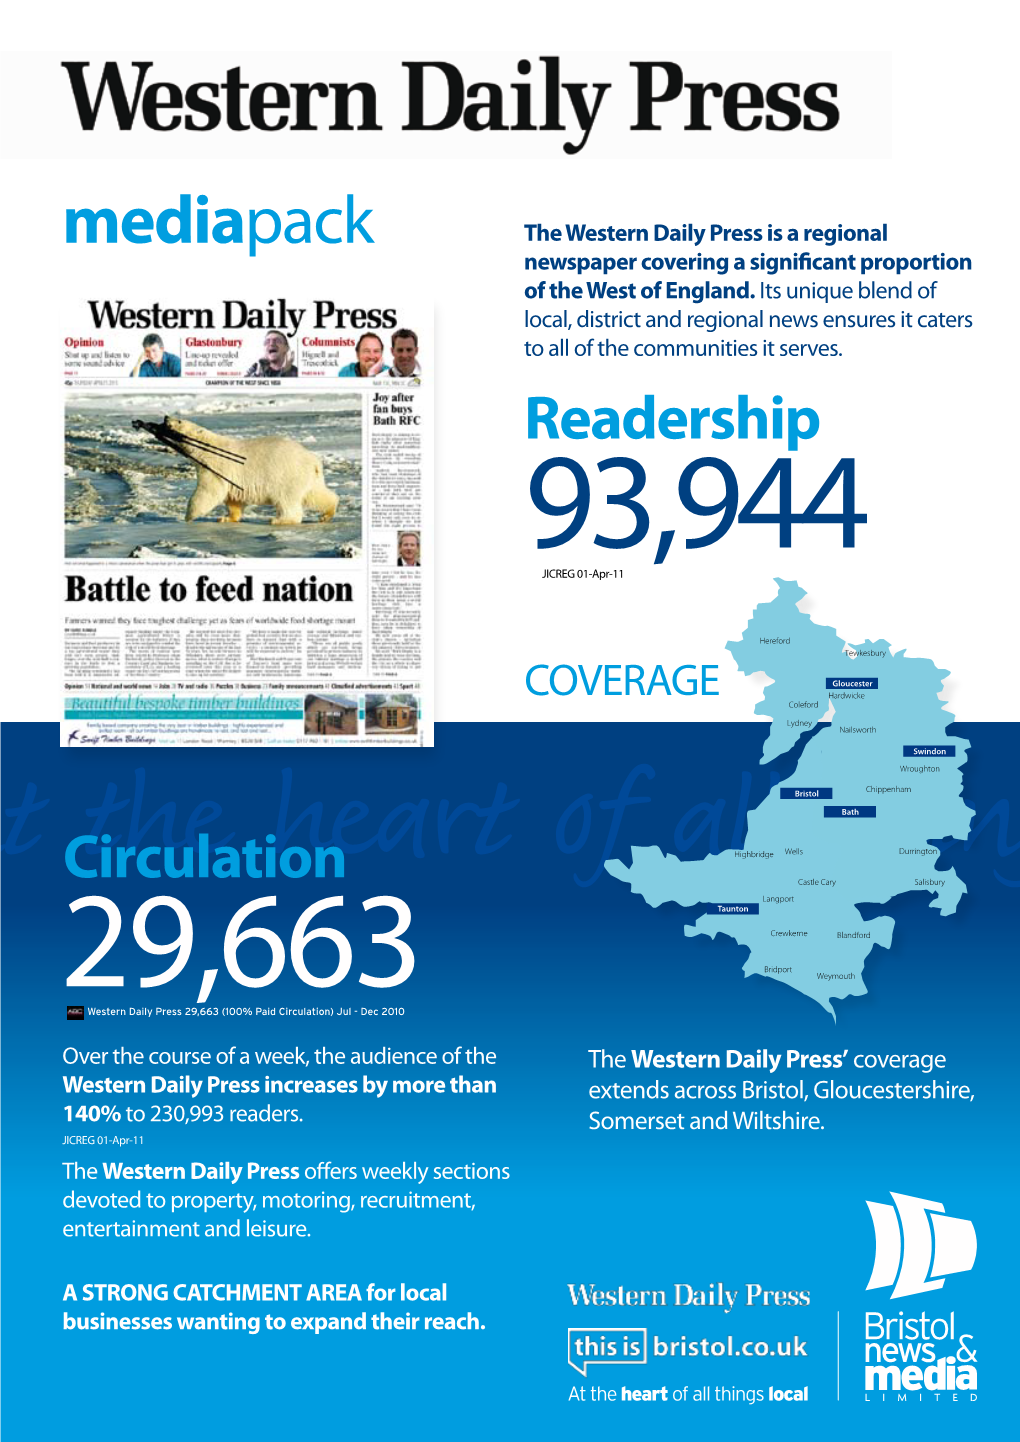 Western Daily Press Is a Regional Newspaper Covering a Significant Proportion of the West of England